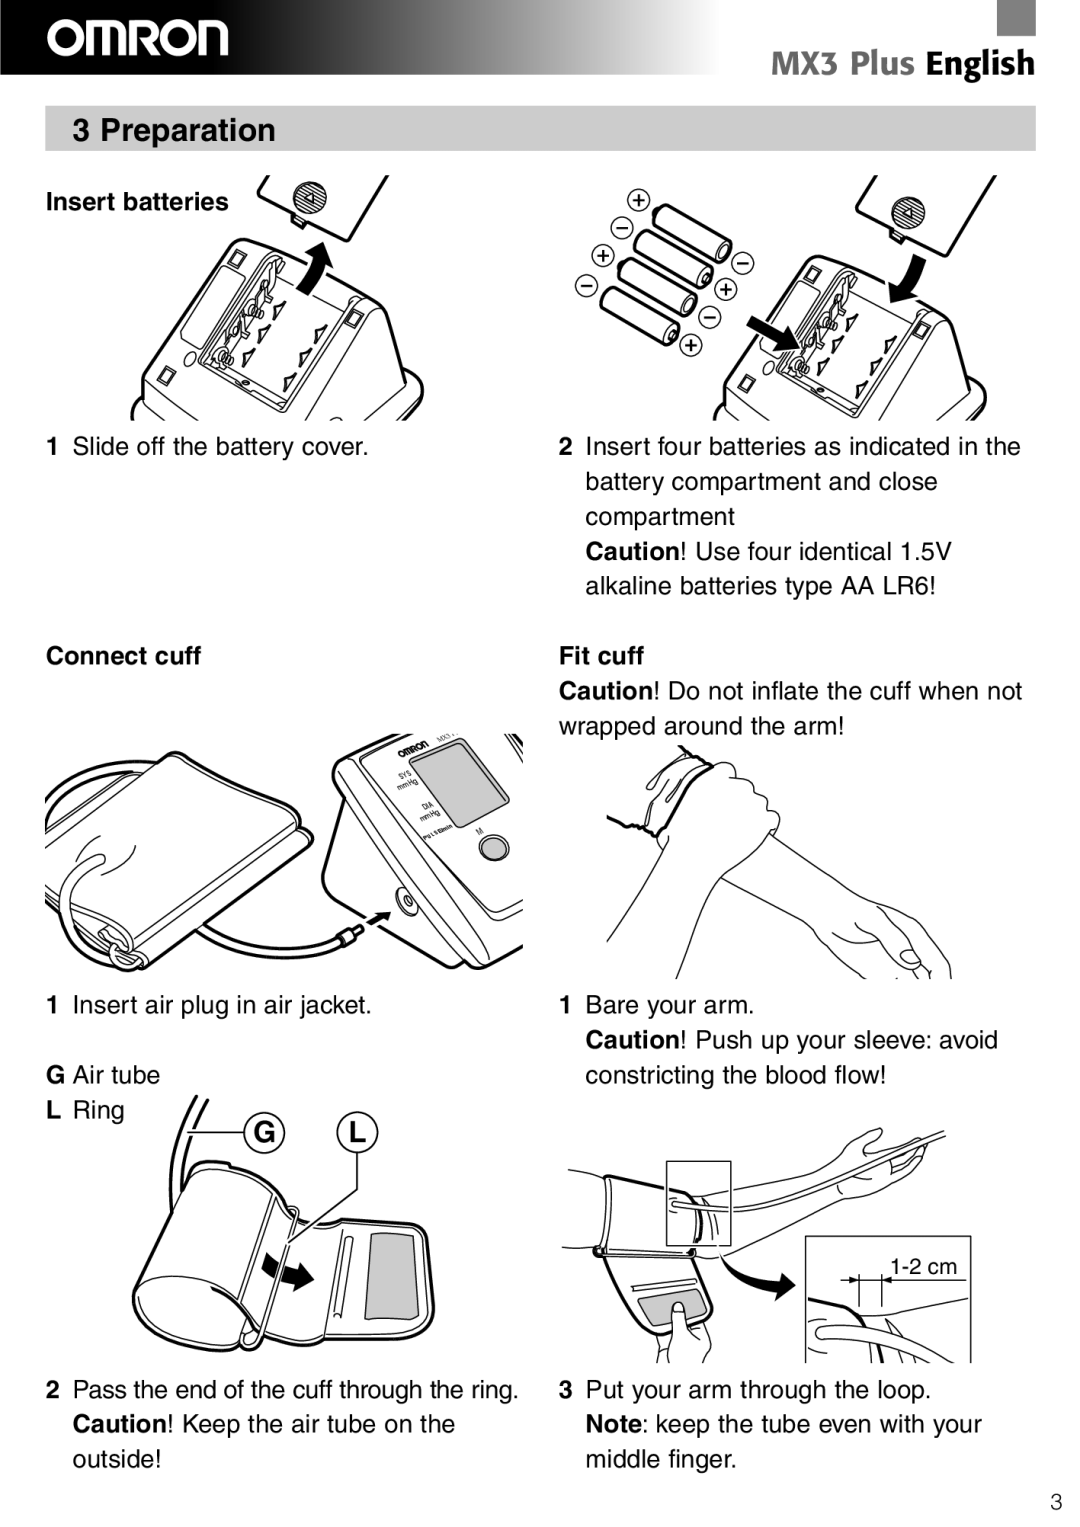 Omron Healthcare manual Preparation, Insert batteries, Connect cuff, Fit cuff, MX3 Plus English 